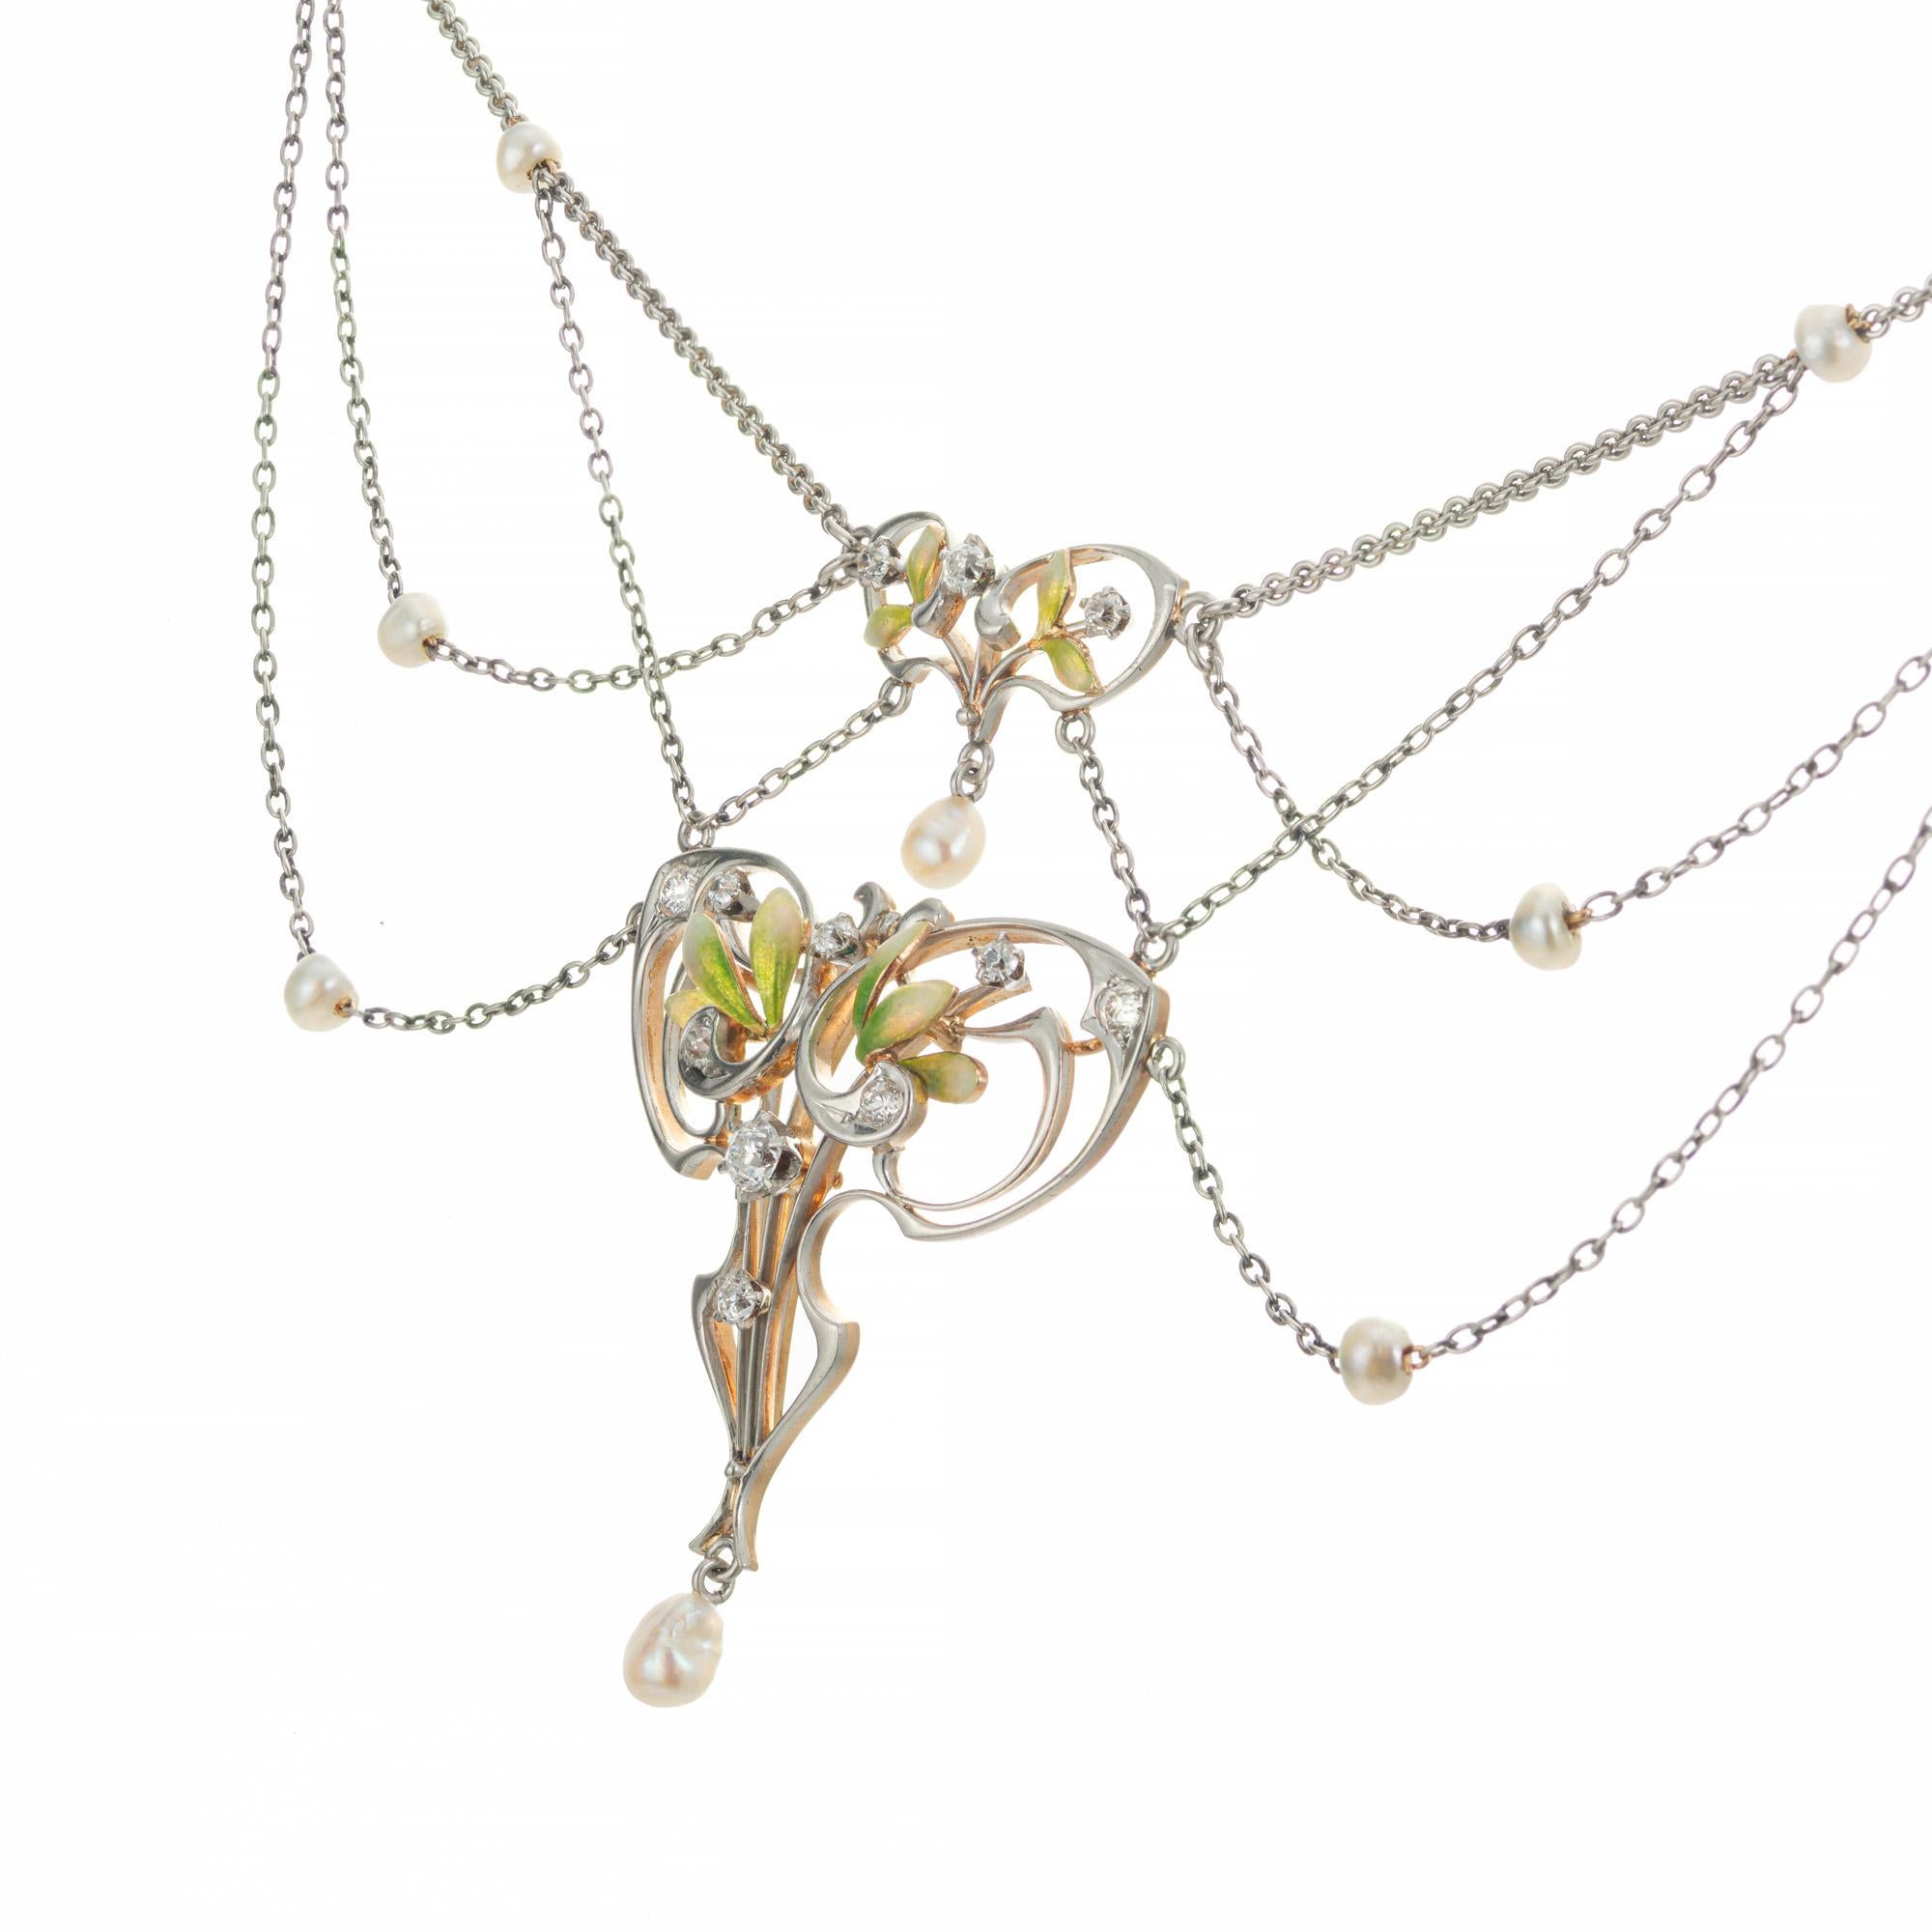 Art Nouveau pearl and diamond pendant necklace. circa 1890's. The floral enamel pendant is platinum in the front with a 14k rose gold back. A GIA certified natural white saltwater pearl dangle, along with 9 round natural white pearls and 9 Old